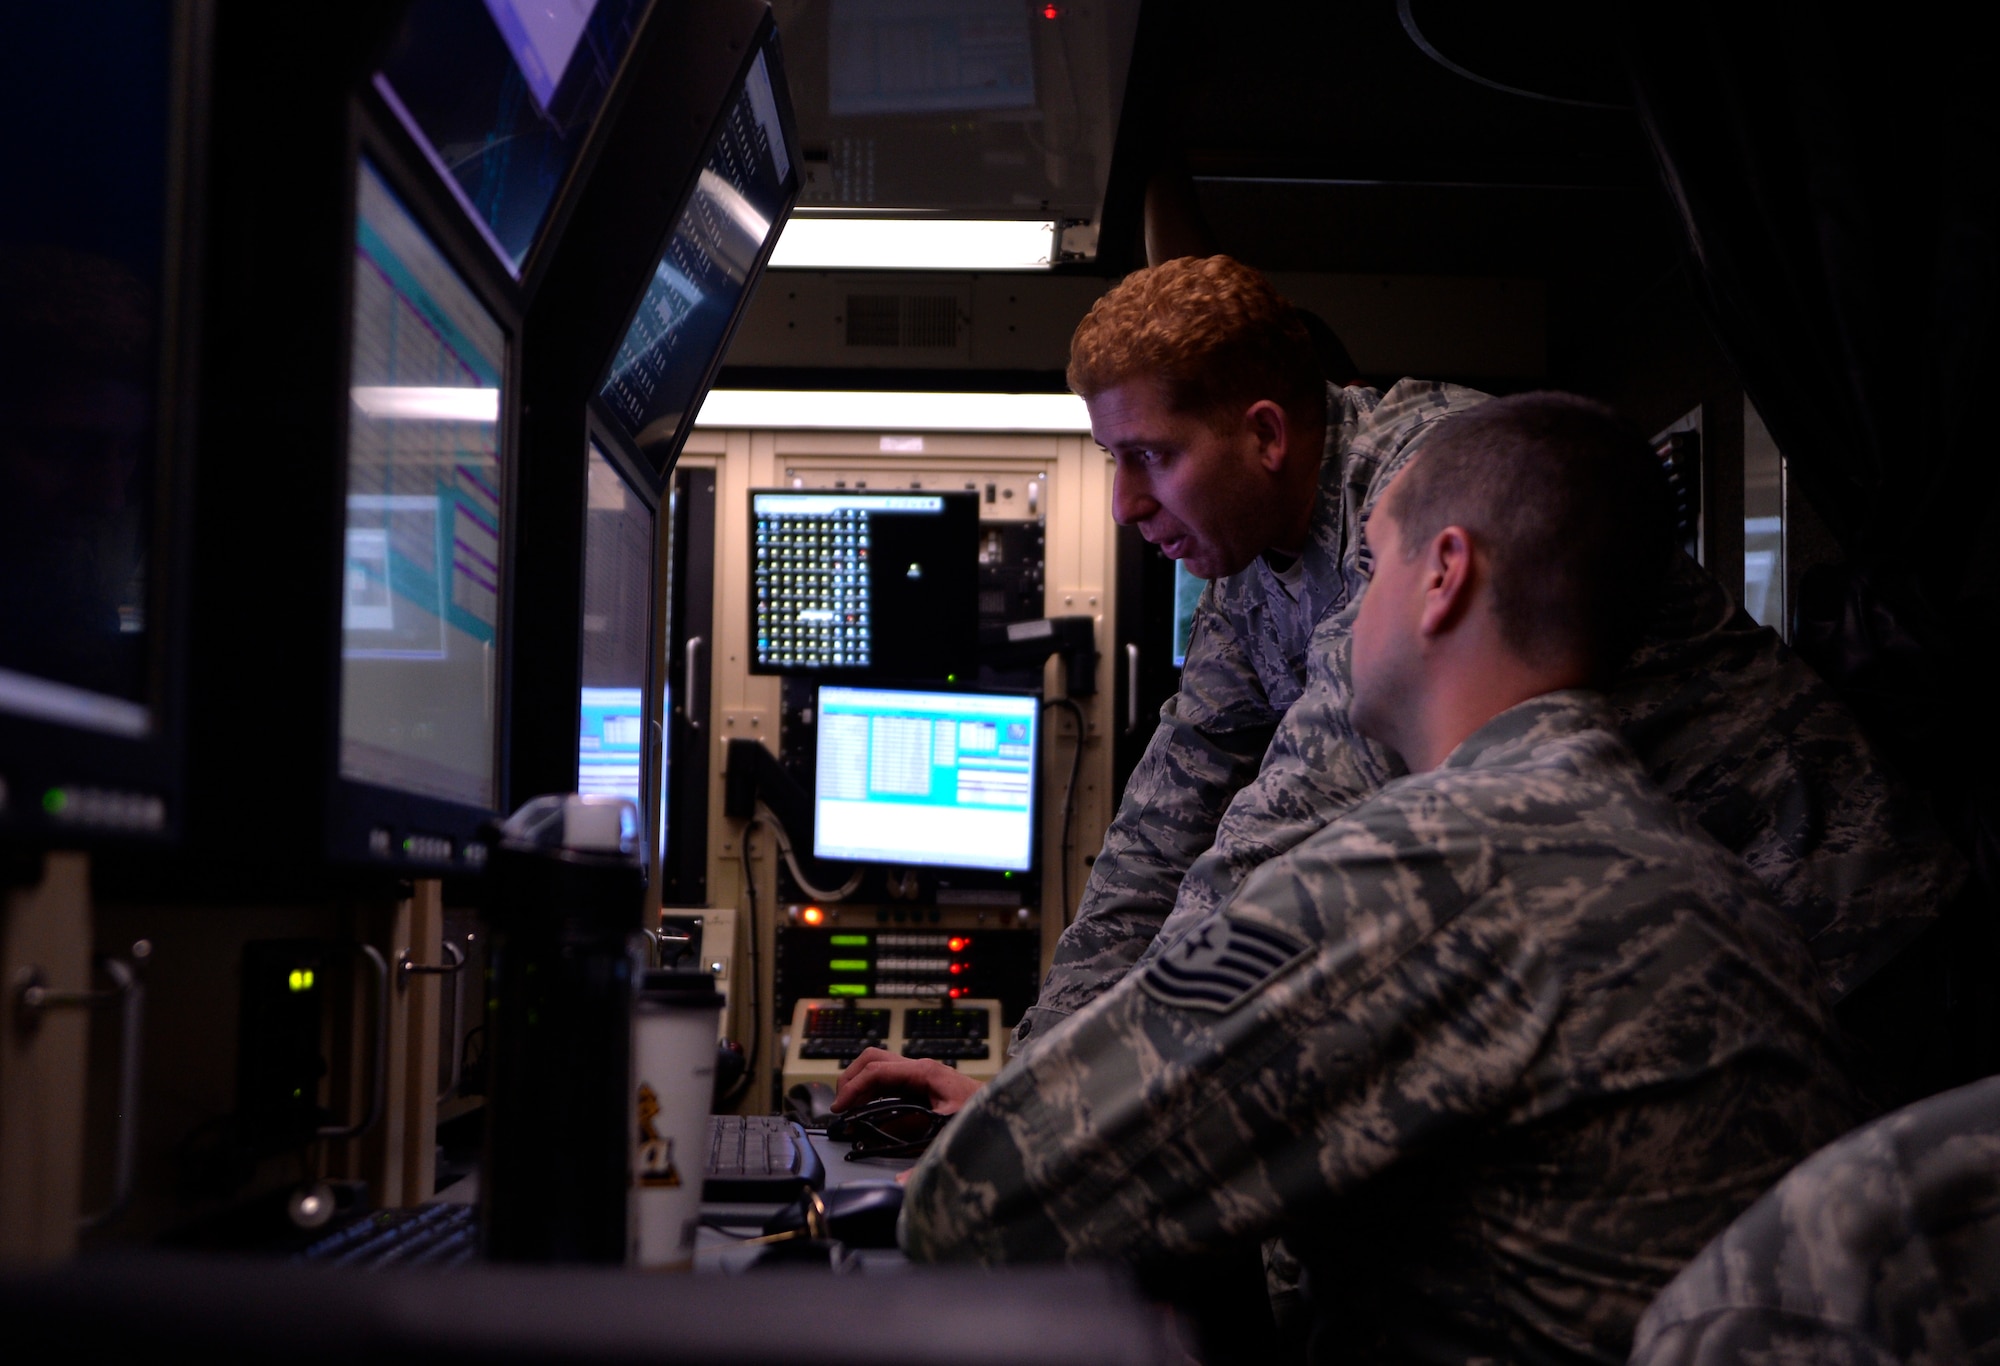 Tech. Sgt. Manuel Quiñones-Figuero, the 432nd Aircraft Communication Maintenance Squadron NCO in charge of formal training unit, teaches Tech. Sgt. Thomas Diest basic postflight procedures for the MQ-1B Predator and MQ-9 Reaper Aug. 19, 2015, at Creech Air Force Base, Nev. The 432nd ACMS is the only unit of its kind in the Air Force dedicated to maintaining the communications network for the RPA enterprise. (U.S. Air Force photo/Airman 1st Class Christian Clausen)